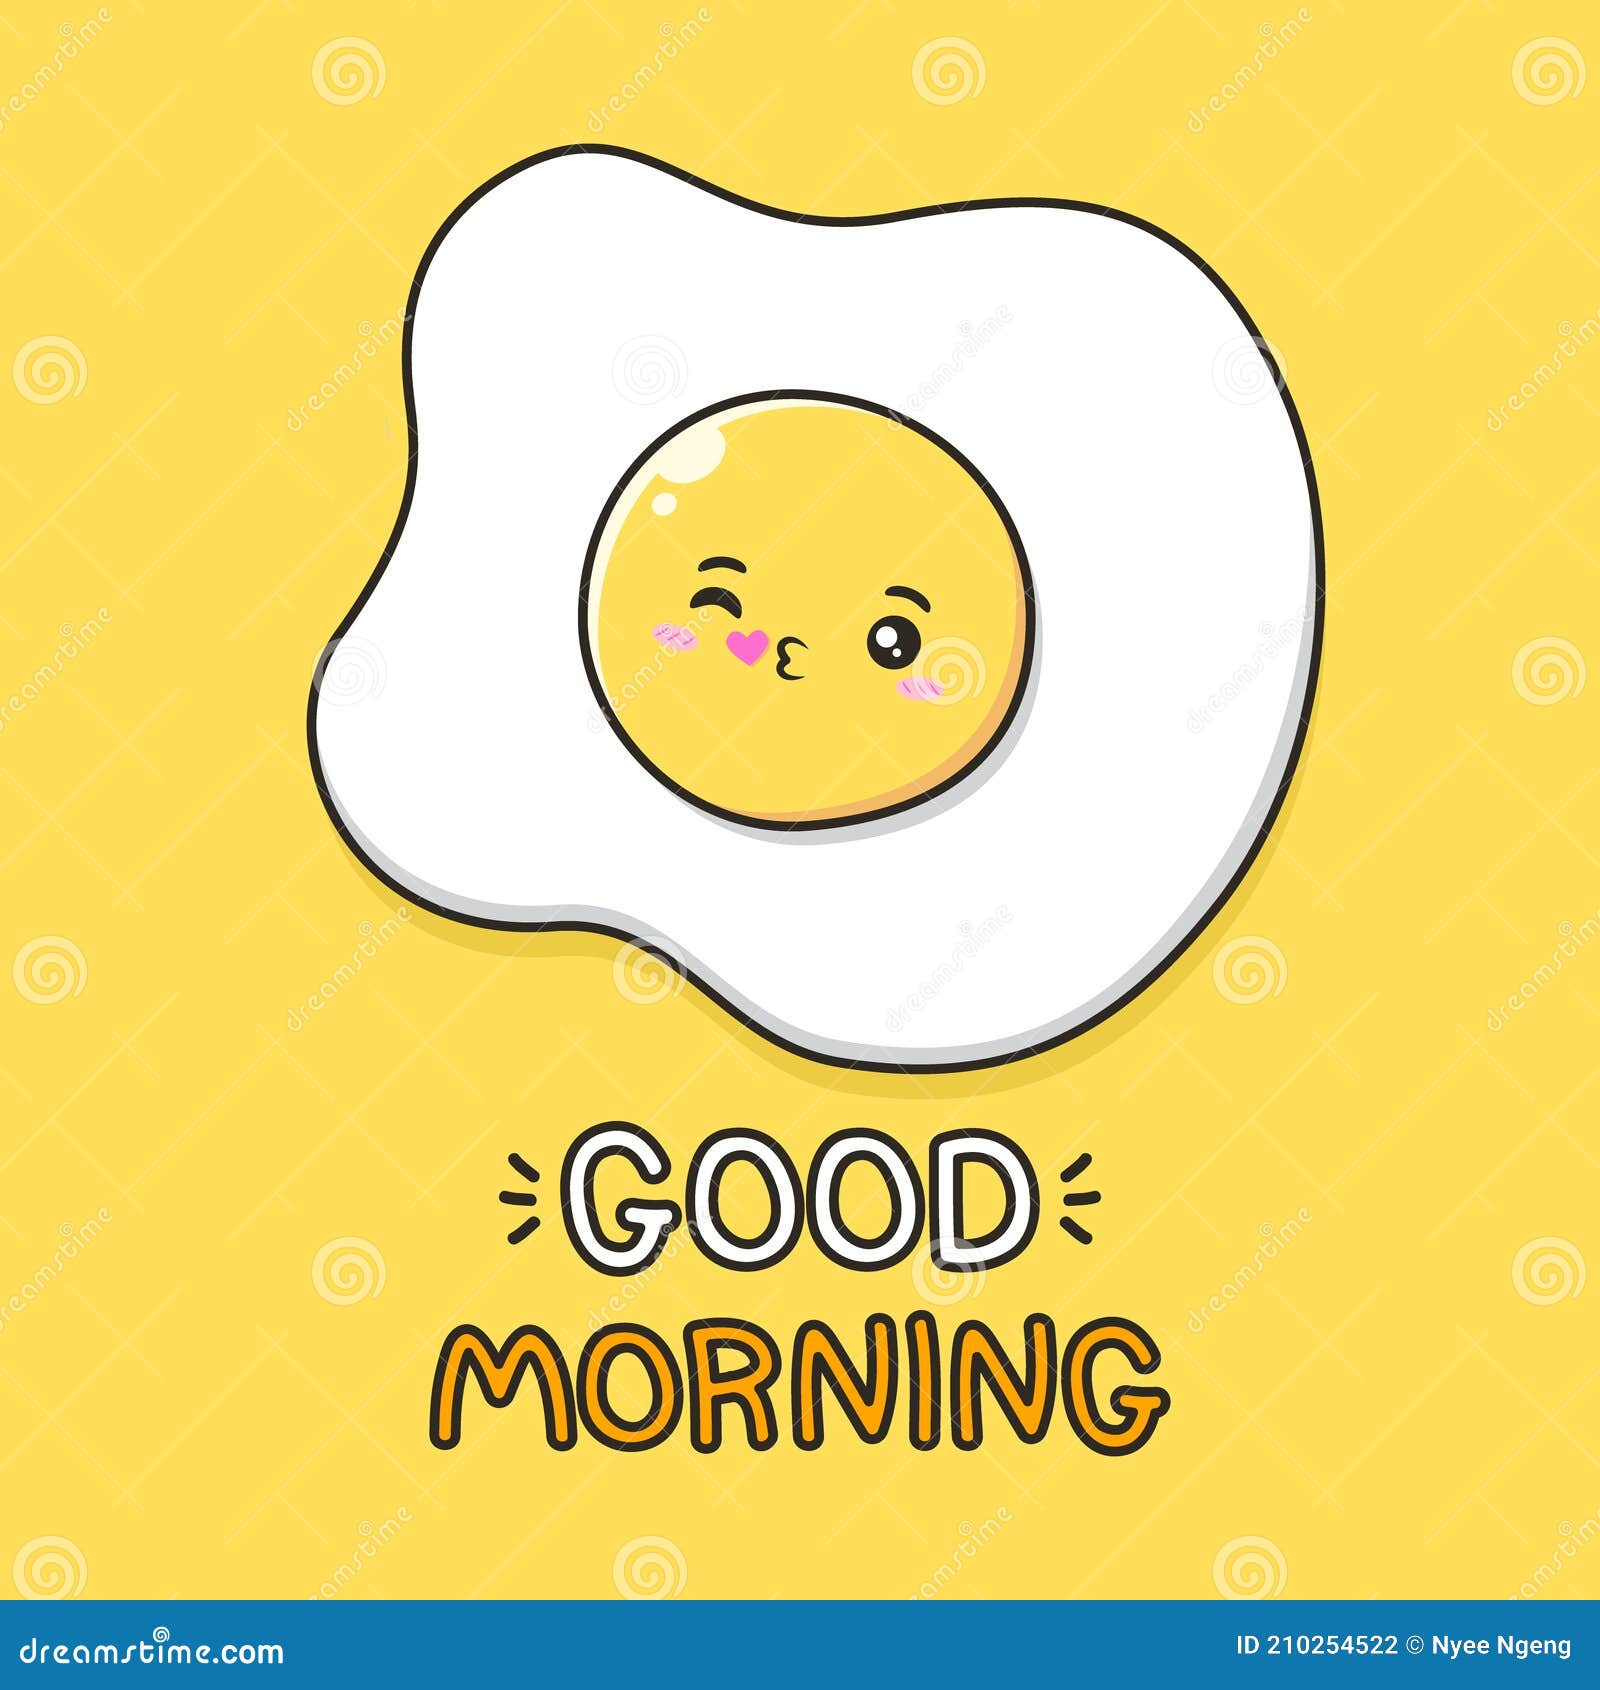 Good Morning Greetings with Cute Egg Stock Vector - Illustration of ...